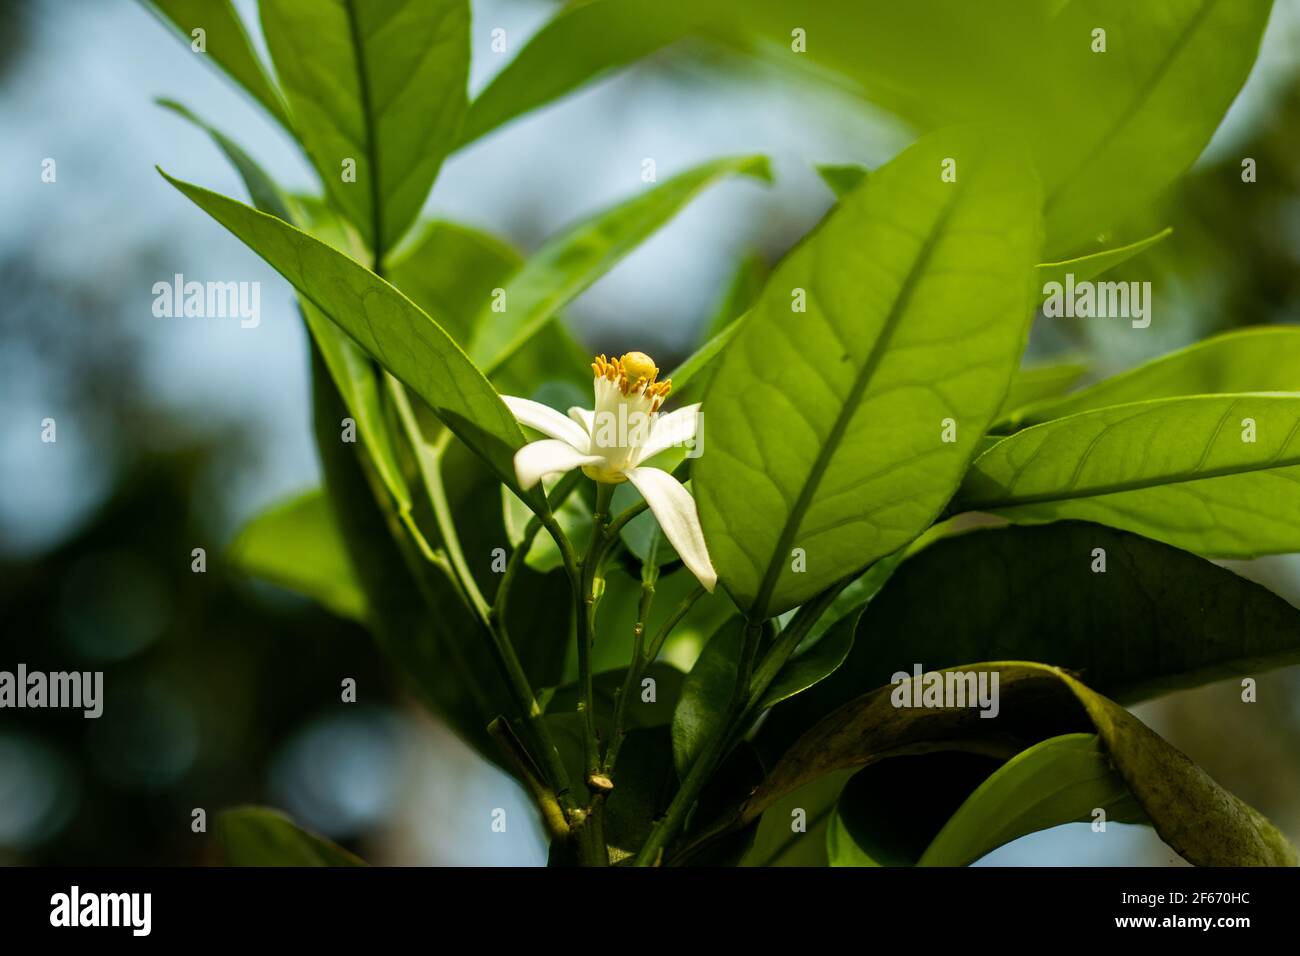 Lemon or Citrus limon is a Evergreen shrubs, fruit trees of the family Rutaceae genus Citrus which makes the flower of White 5 petals on Racemous Infl Stock Photo